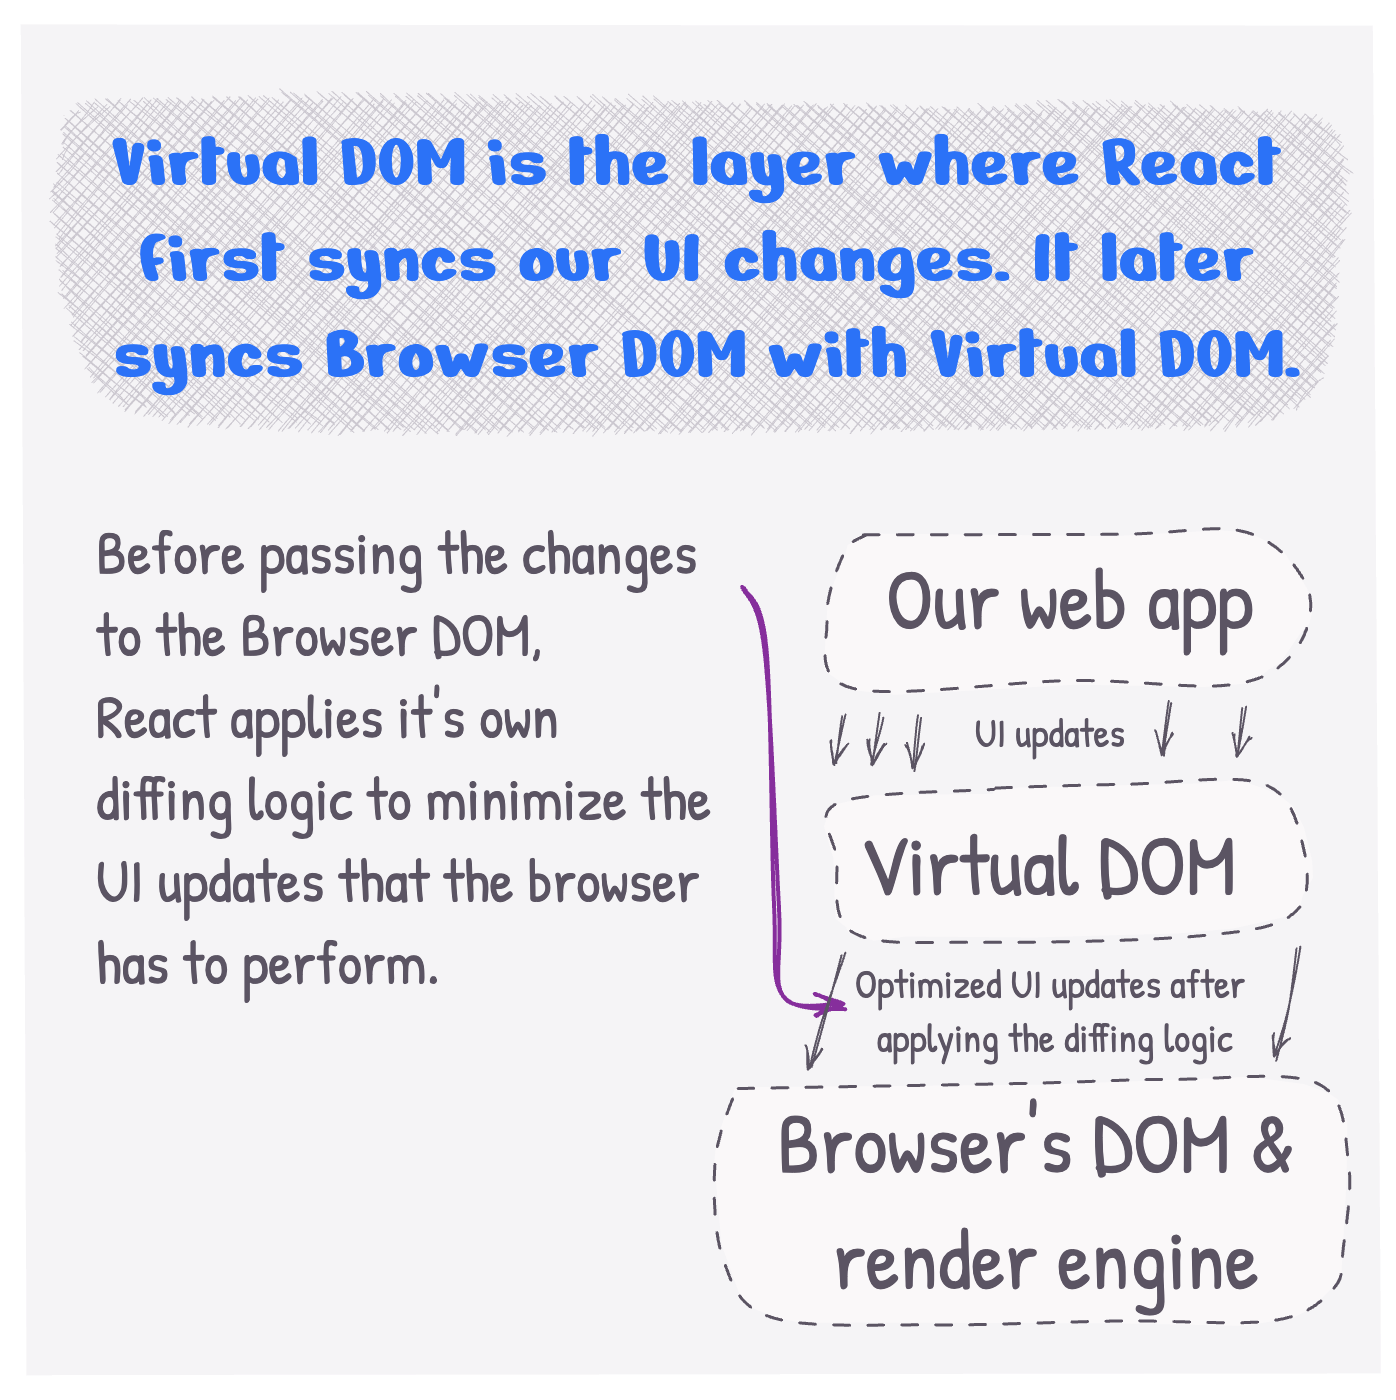 Virtual DOM is the layer where React first syncs our UI changes. It later syncs Browser DOM with Virtual DOM. Before passing the changes to the Browser DOM, React applies it's own diffing logic to minimize the UI updates that the browser has to perform.